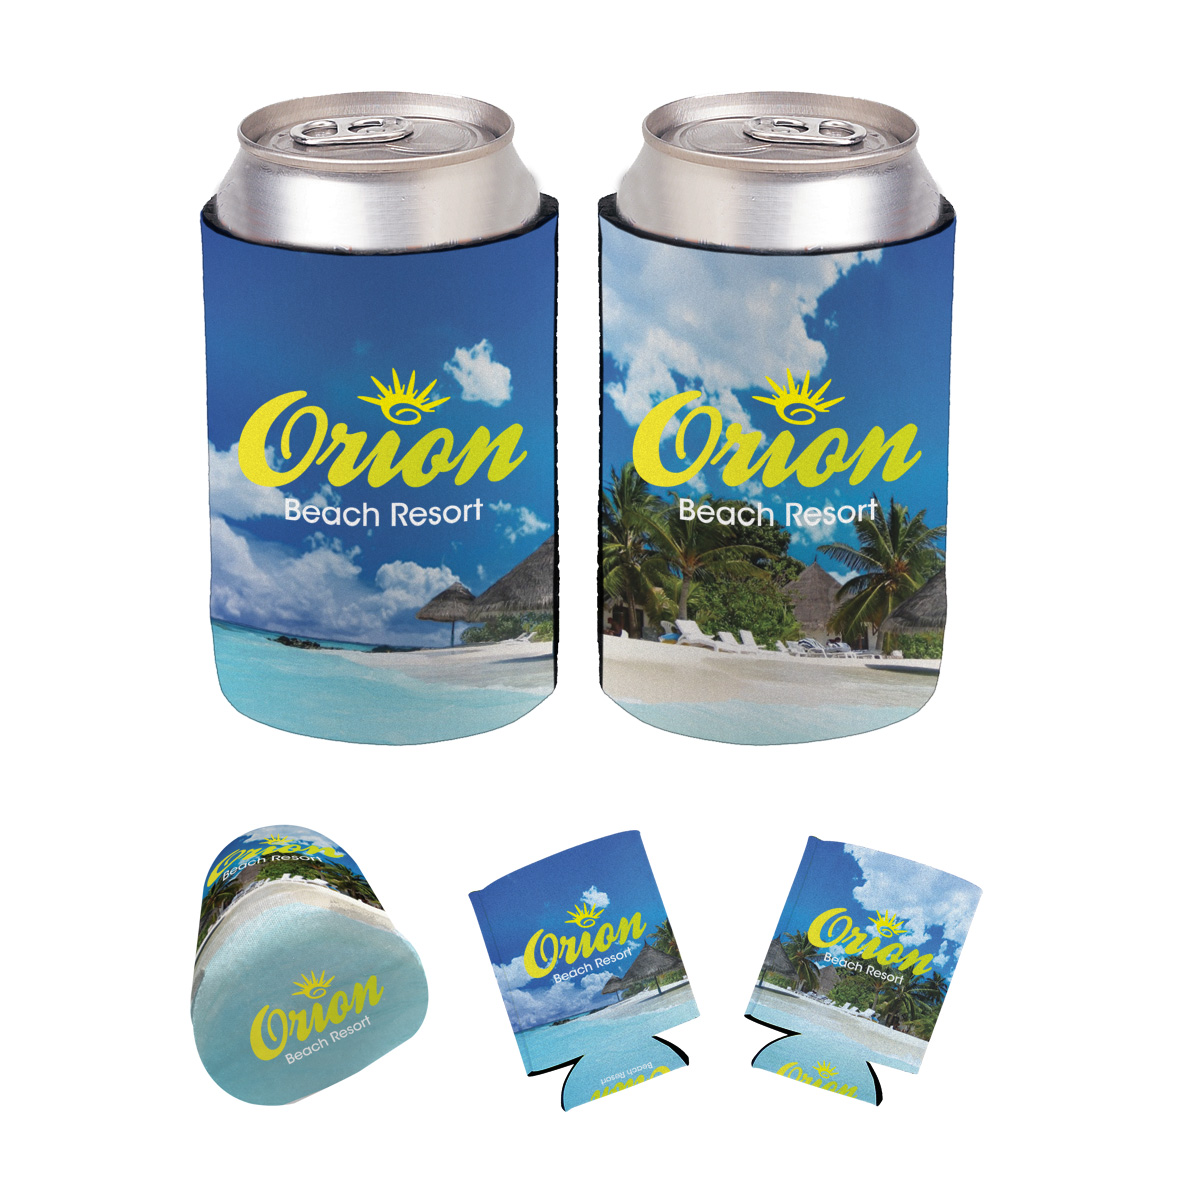 $0.65 Each Kan-Tastic Can Cooler 200 Quantity Promotional Product/Bulk with Your Logo/Customized Size: Fits Standard Aluminum Beverage Cans. 